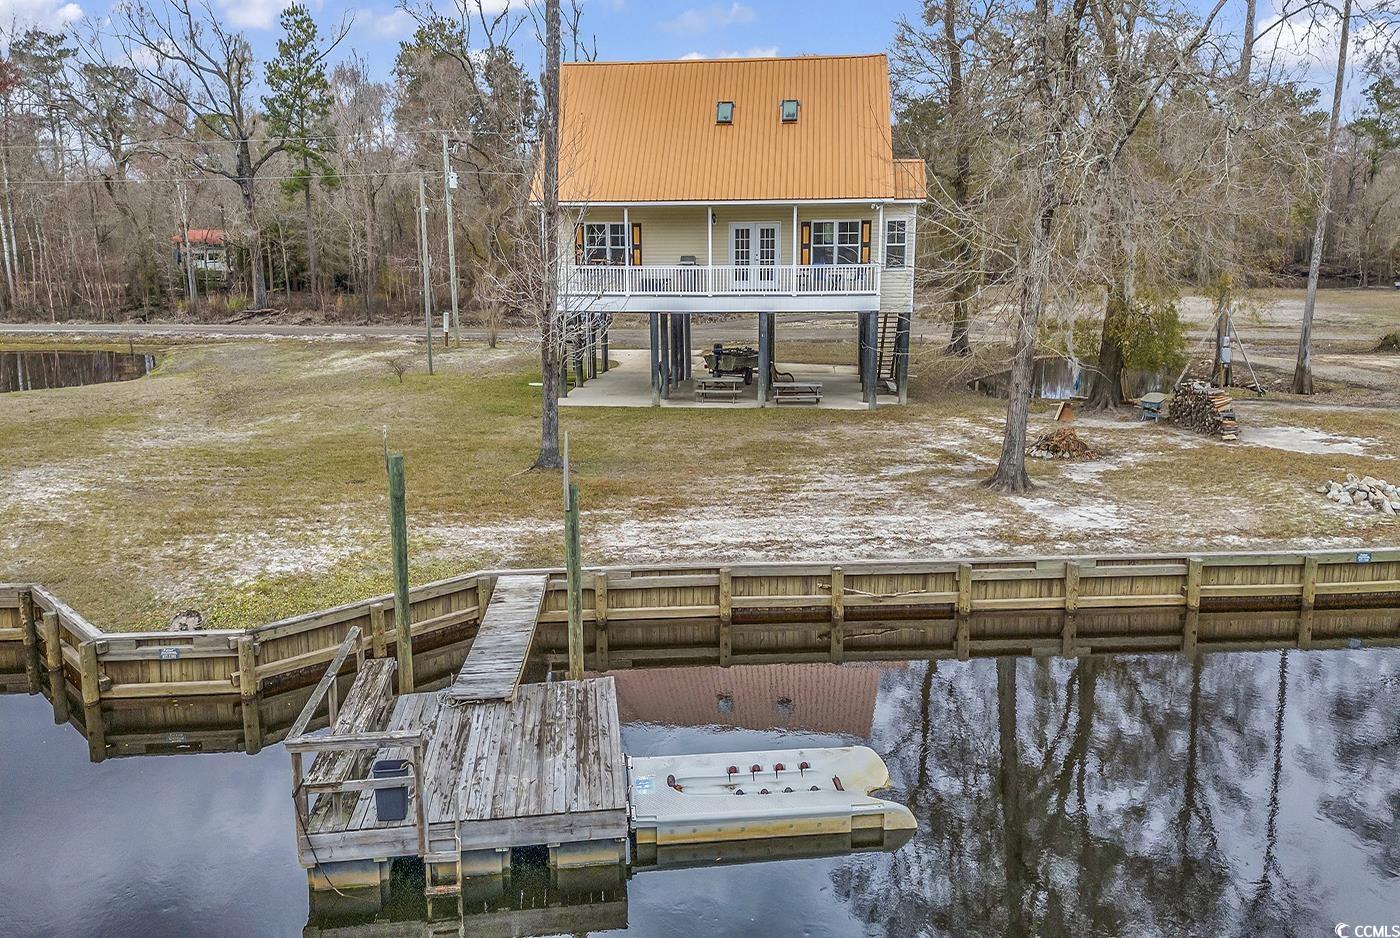 experience the best of both worlds with this tranquil, quiet lakefront home, just a short drive away from the stunning beaches of the grand strand. this riverfront home, a rare gem off highway 90 outside conway, s.c., awaits your presence. nestled on a spacious lot adorned with beautiful cypress trees, the breathtaking views of the waccamaw river surround you. embrace a plethora of activities on your 0.33-acre lot – from having a campfire under the clear open sky for stargazing, to sitting on your floating dock, fishing, swimming, or enjoying a cup of coffee on the expansive back porch overlooking the river. with ample parking for your boat and toys, and being free from hoa restrictions, you have the freedom to make the most of your property.  inside, the home provides abundant space for relishing your riverfront living experience. the master suite, located on the first floor, boasts a large walk-in closet and a spacious private bath. another bedroom and full bath are also conveniently situated on the main floor. upstairs, a versatile loft area, currently used as a bedroom, offers endless possibilities. the laundry room, equipped with fairly new washer and dryer that will convey, is conveniently located off the kitchen area. granite countertops adorn both the kitchen and bathrooms, adding a touch of elegance. don't miss out on the opportunity to seize this chance to own a stunning piece of paradise along the waccamaw river.